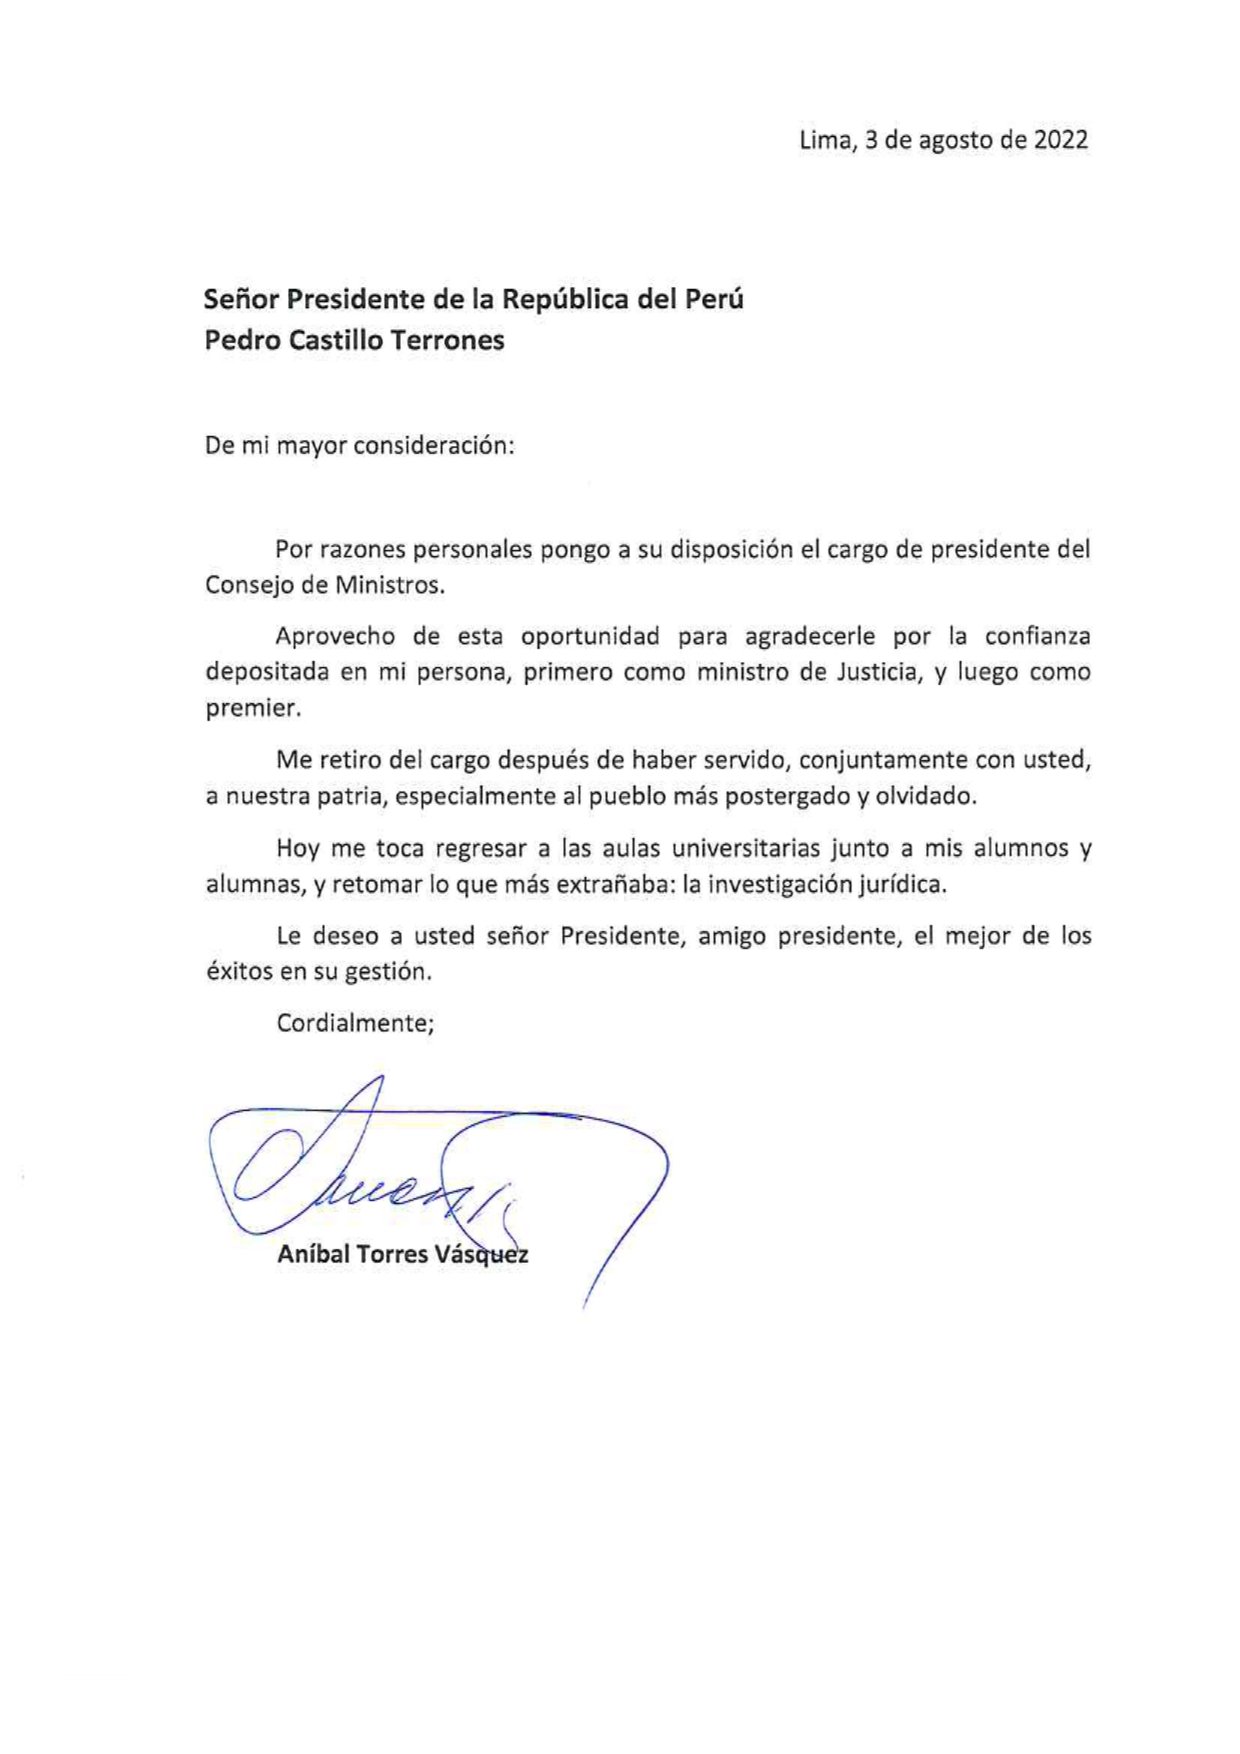 Aníbal Torres presented a letter of resignation from the position of President of the Council of Ministers